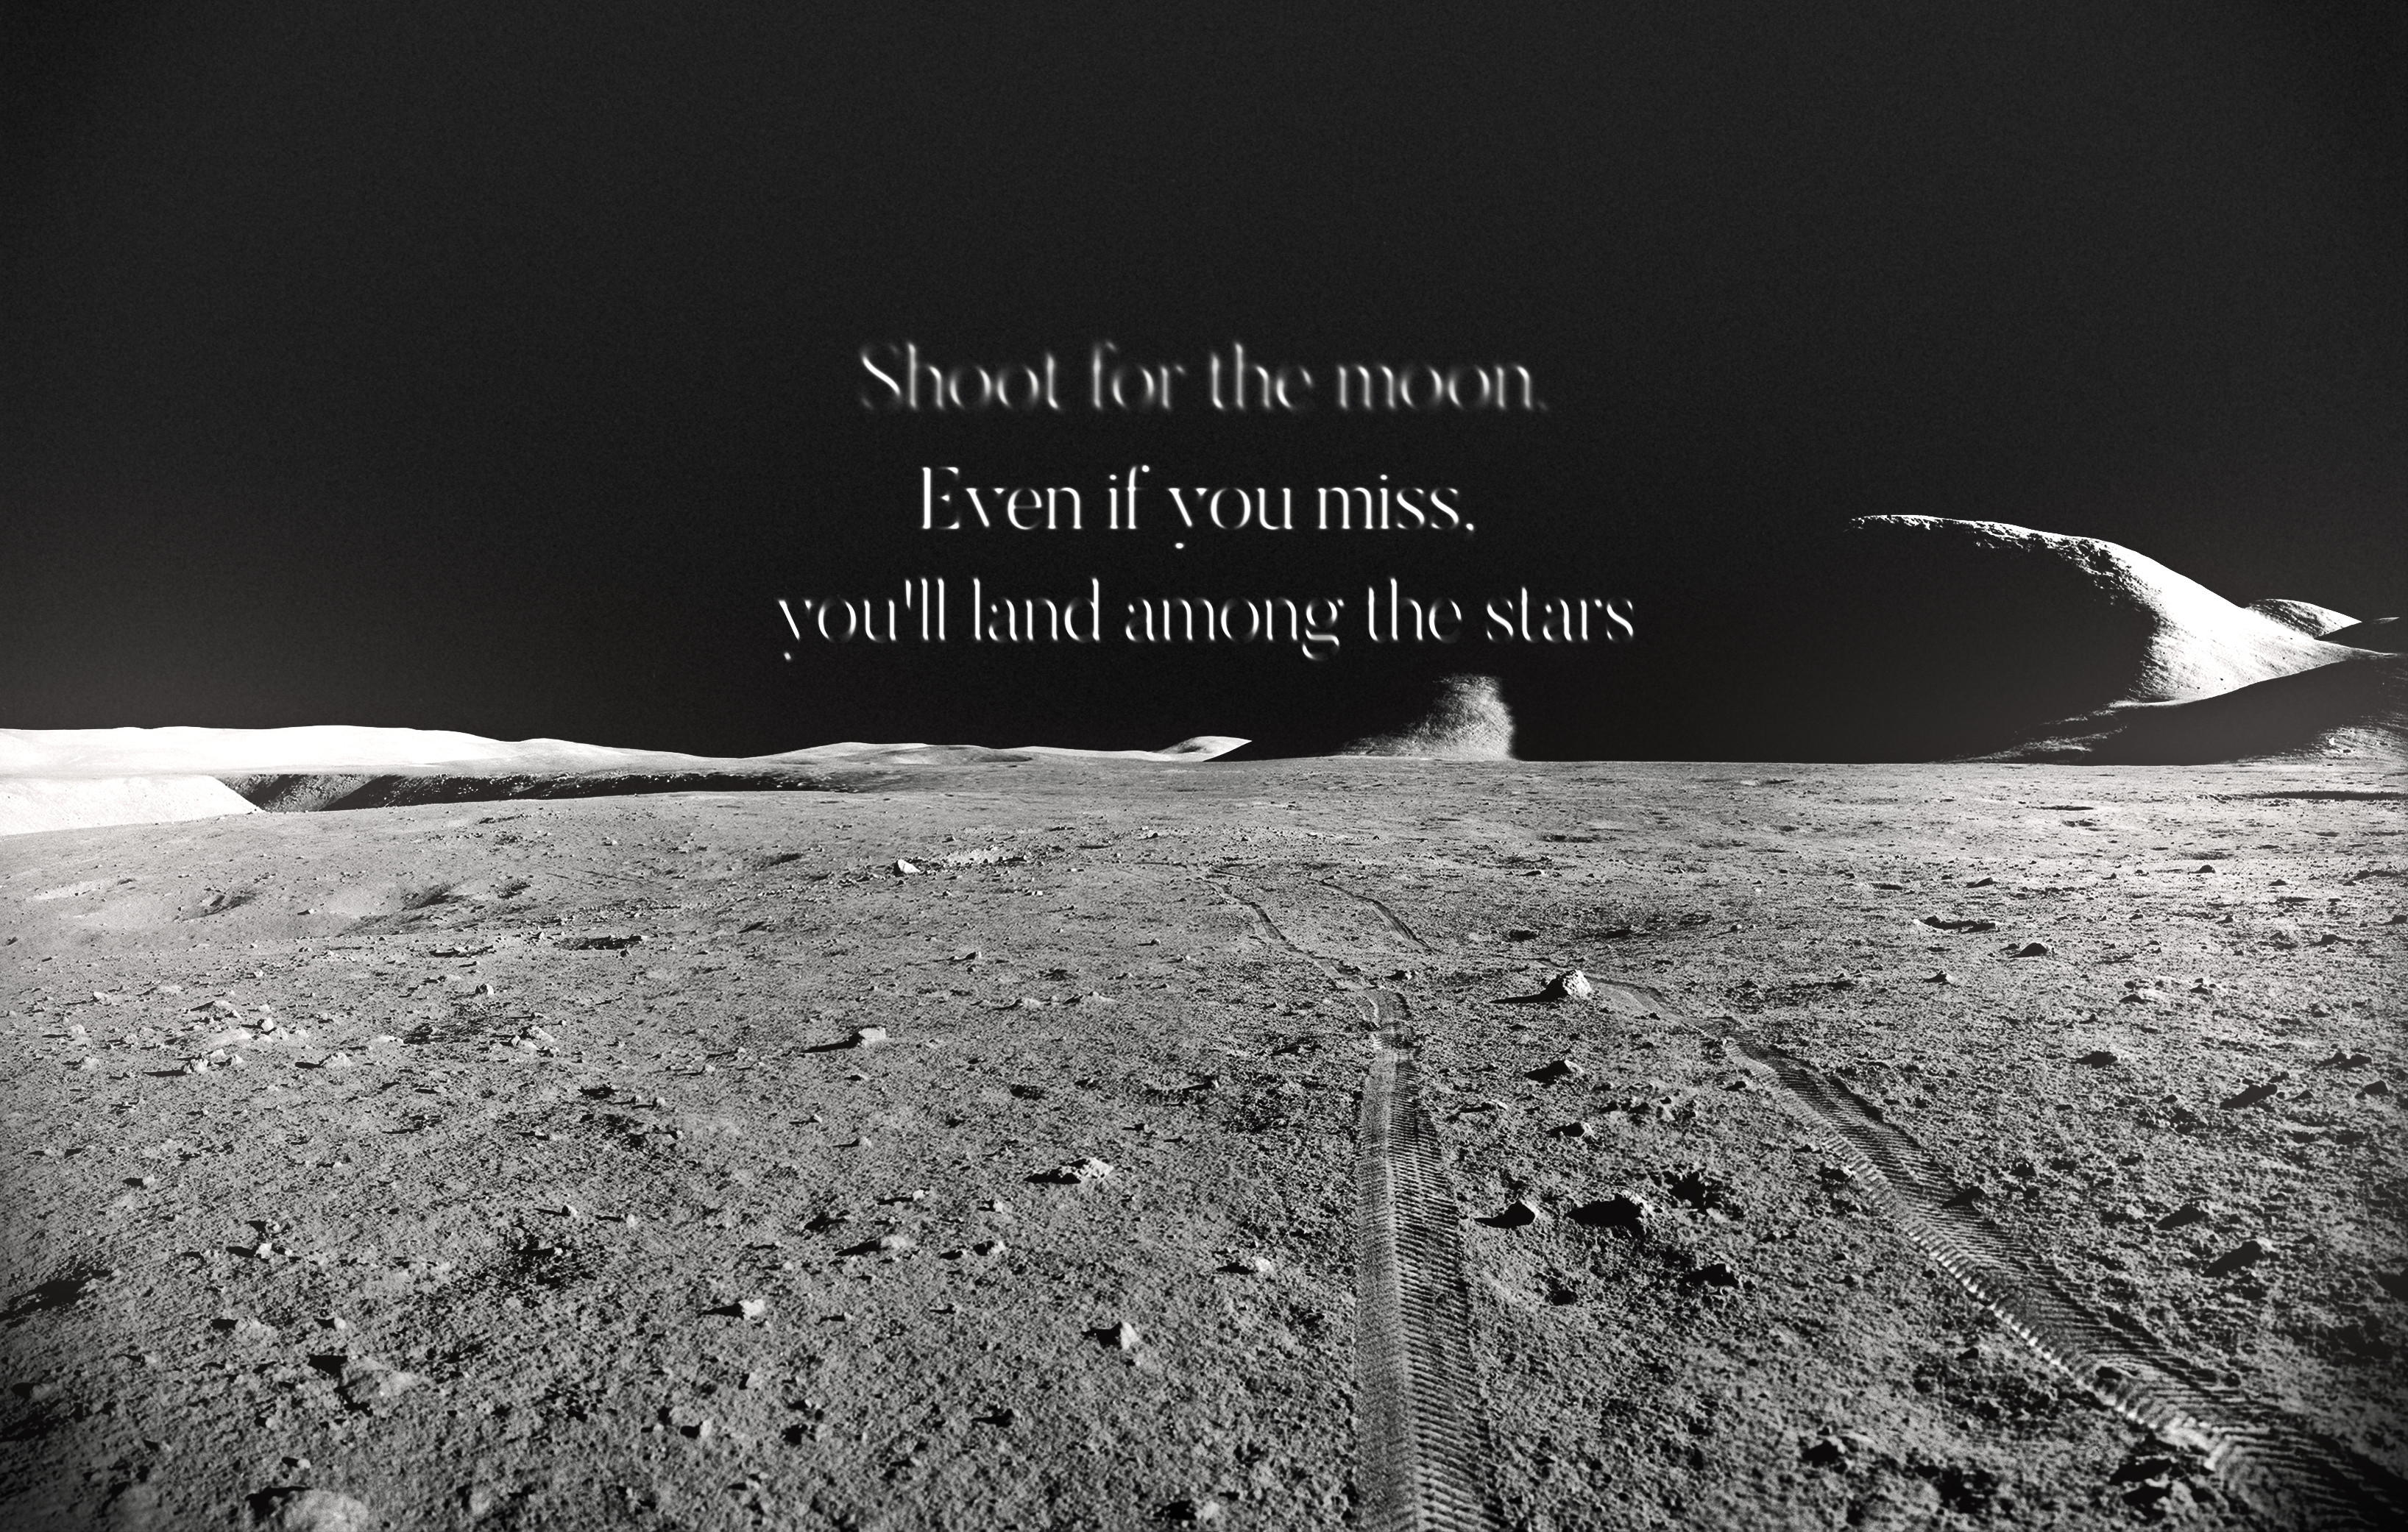 General 3272x2082 quote Moon Lunar surface space monochrome text